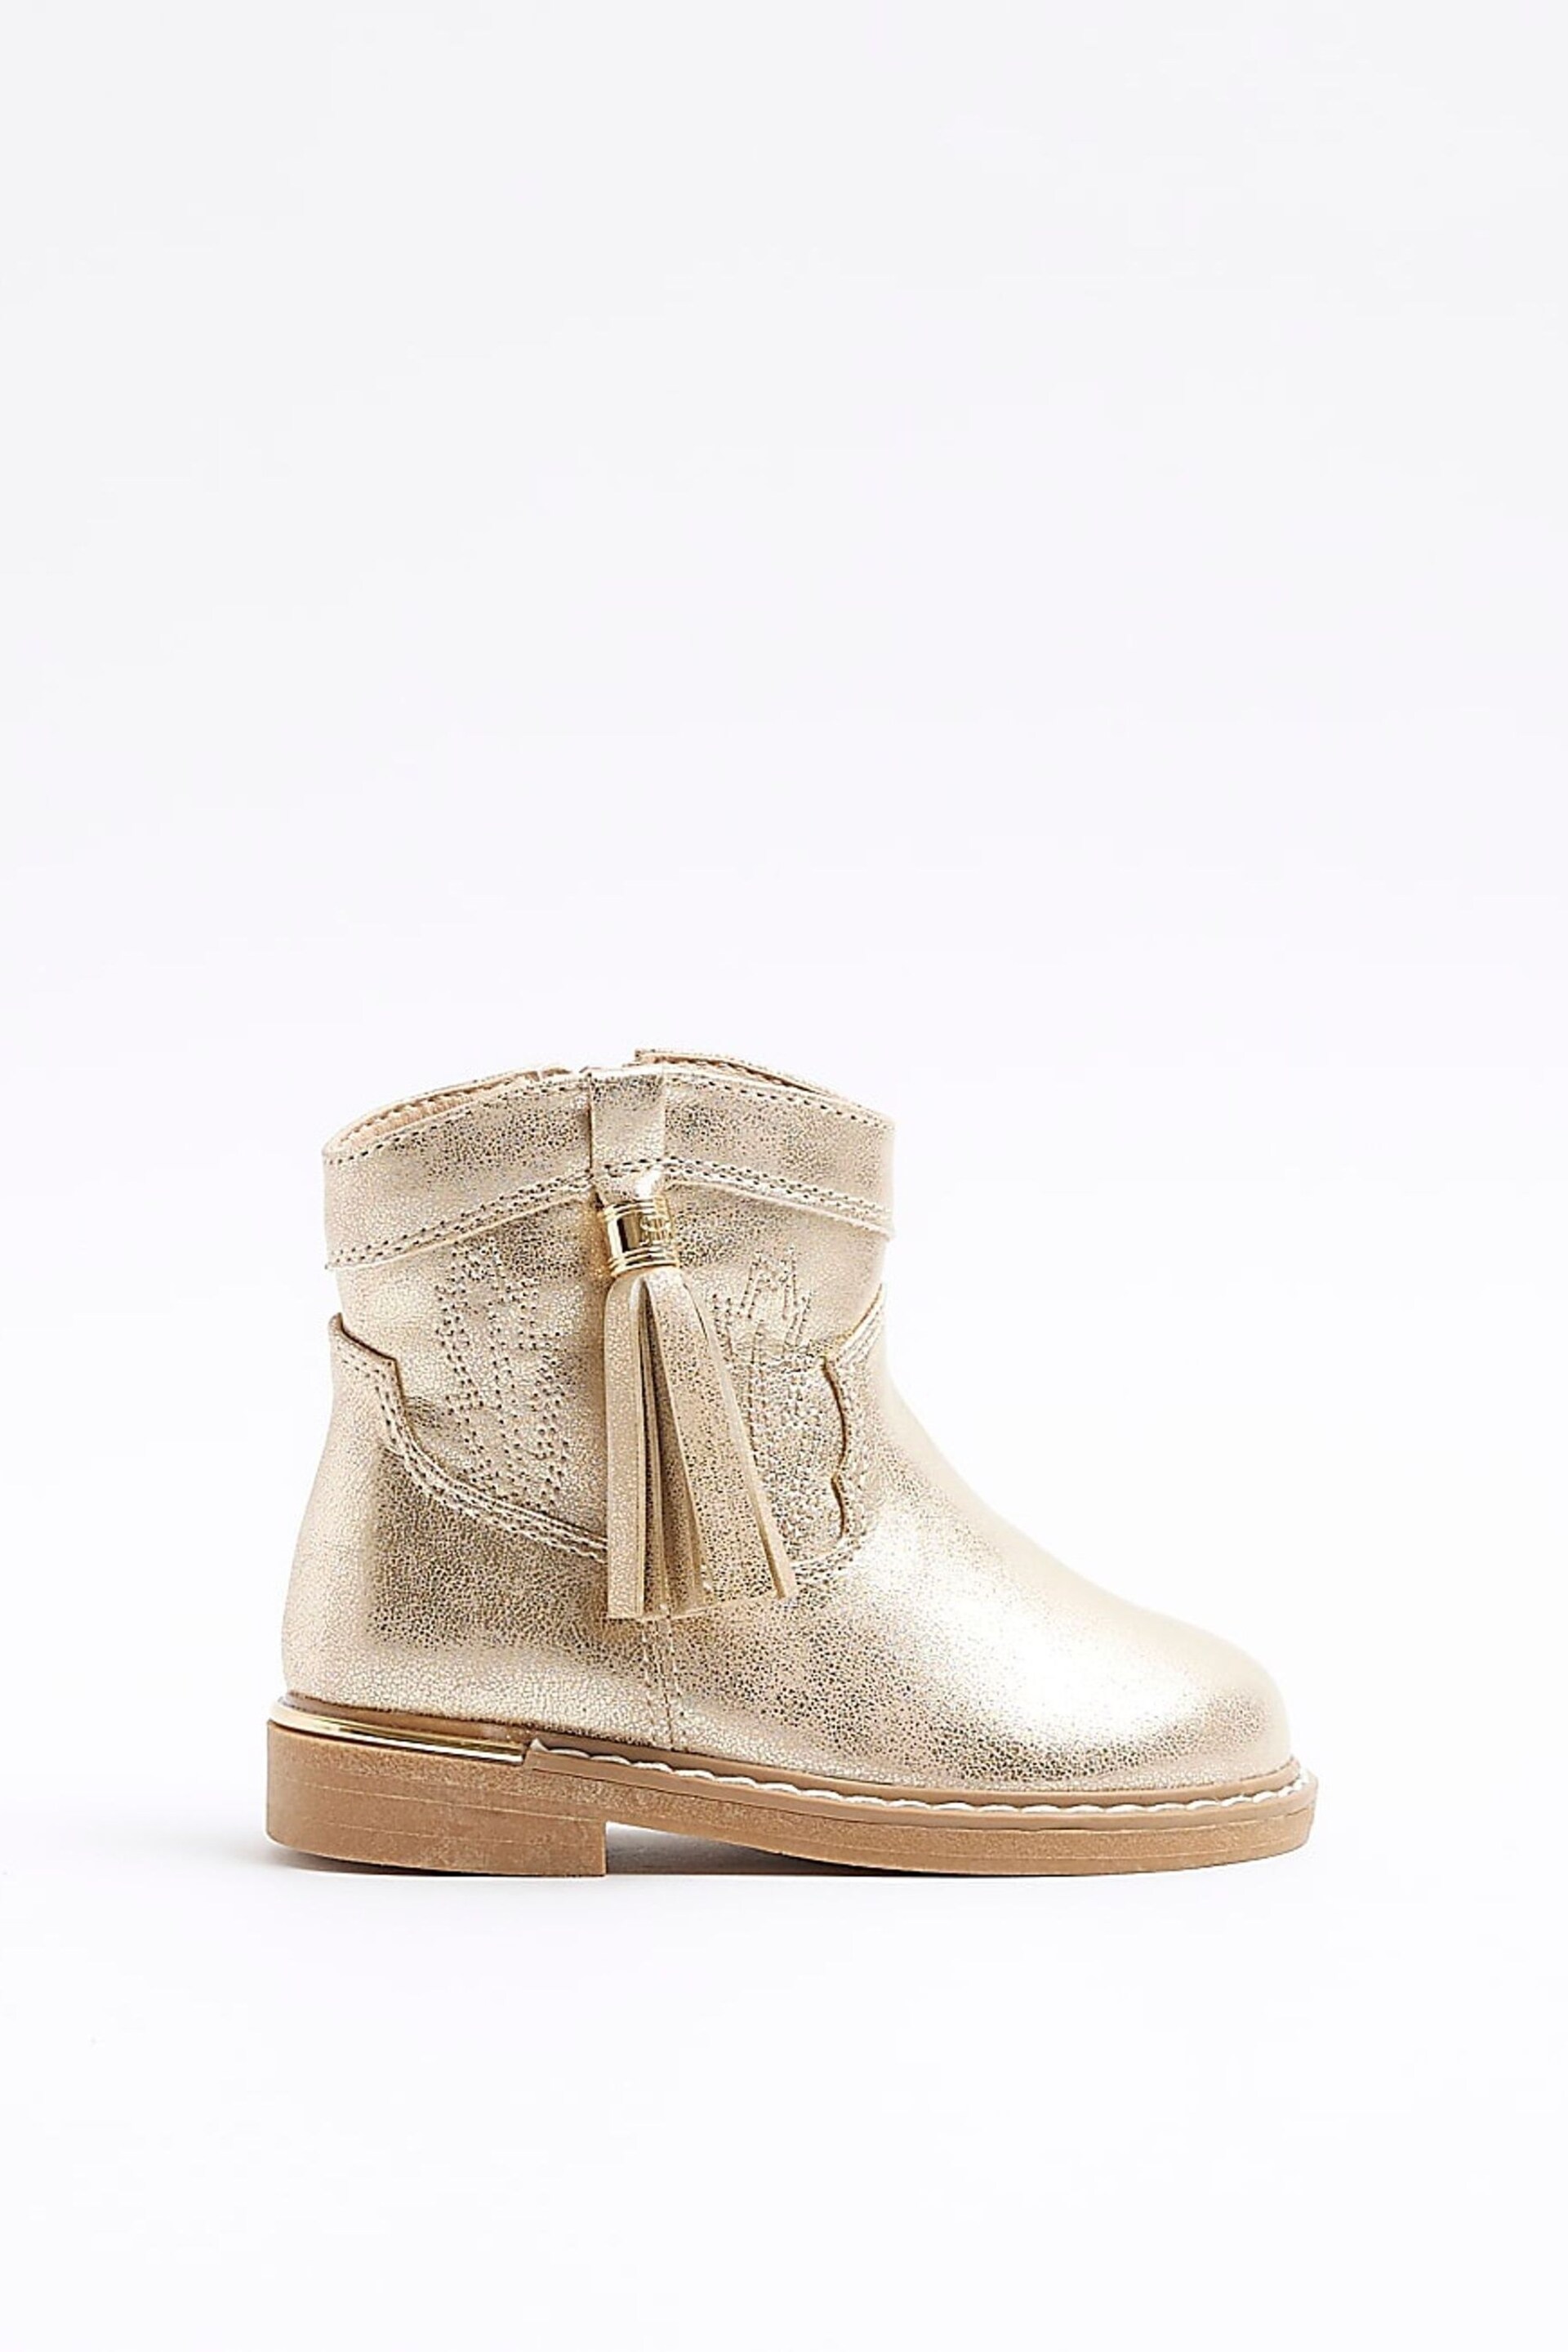 River Island Gold Girls Tassel Western Boots - Image 1 of 5